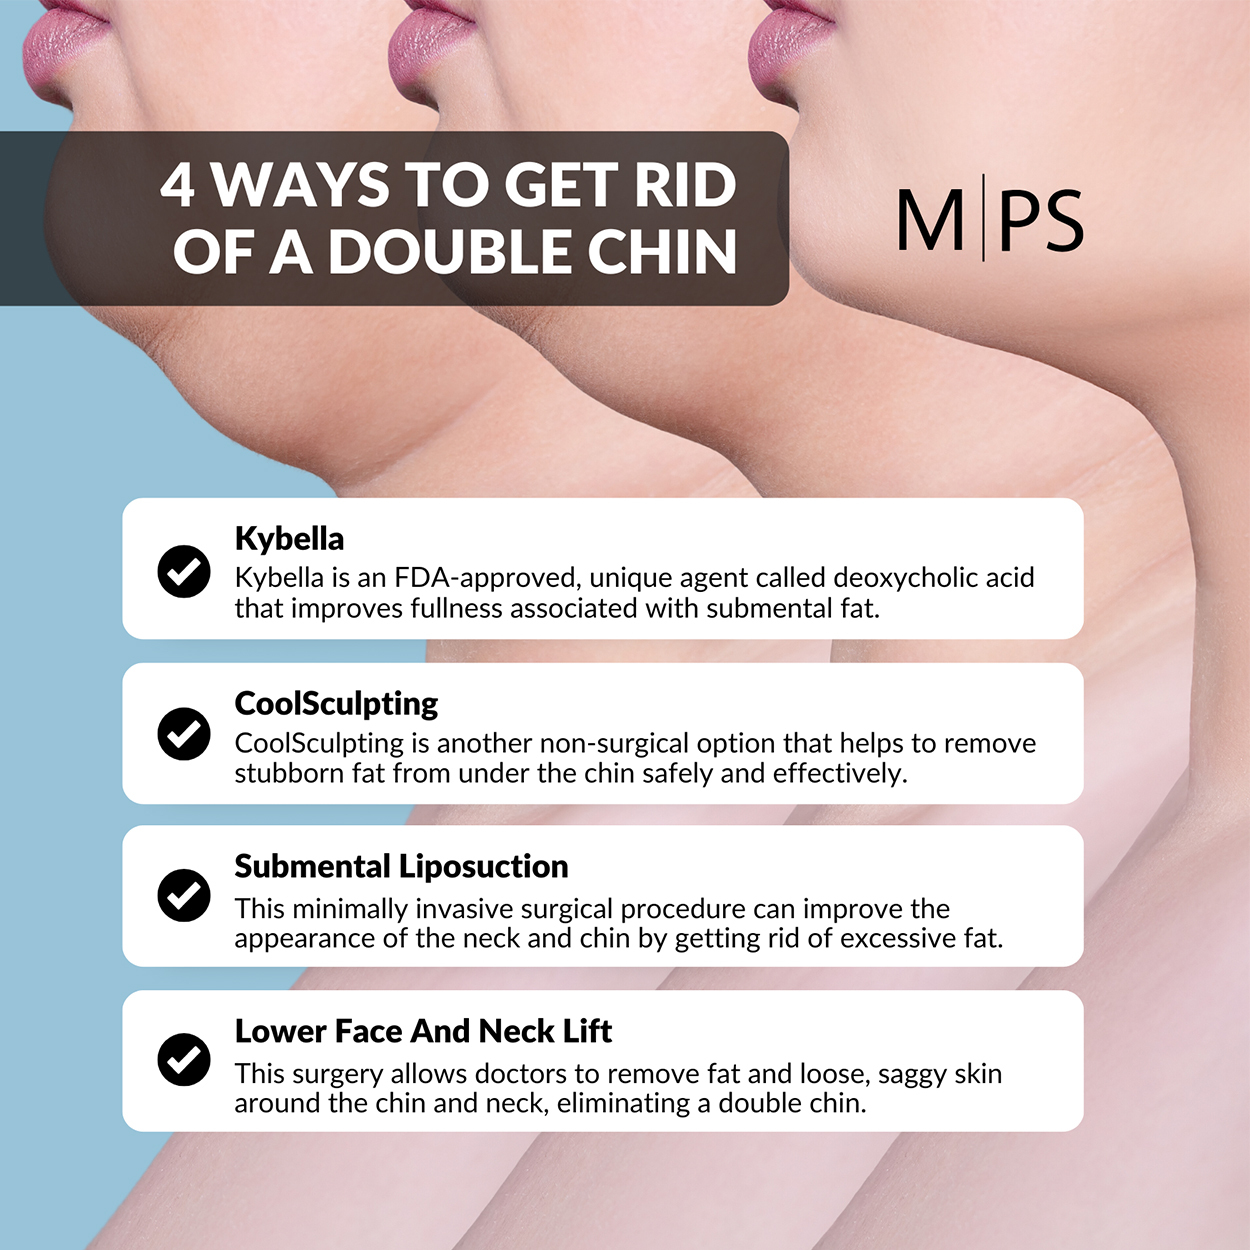 4 Ways To Get Rid Of A Double Chin banner